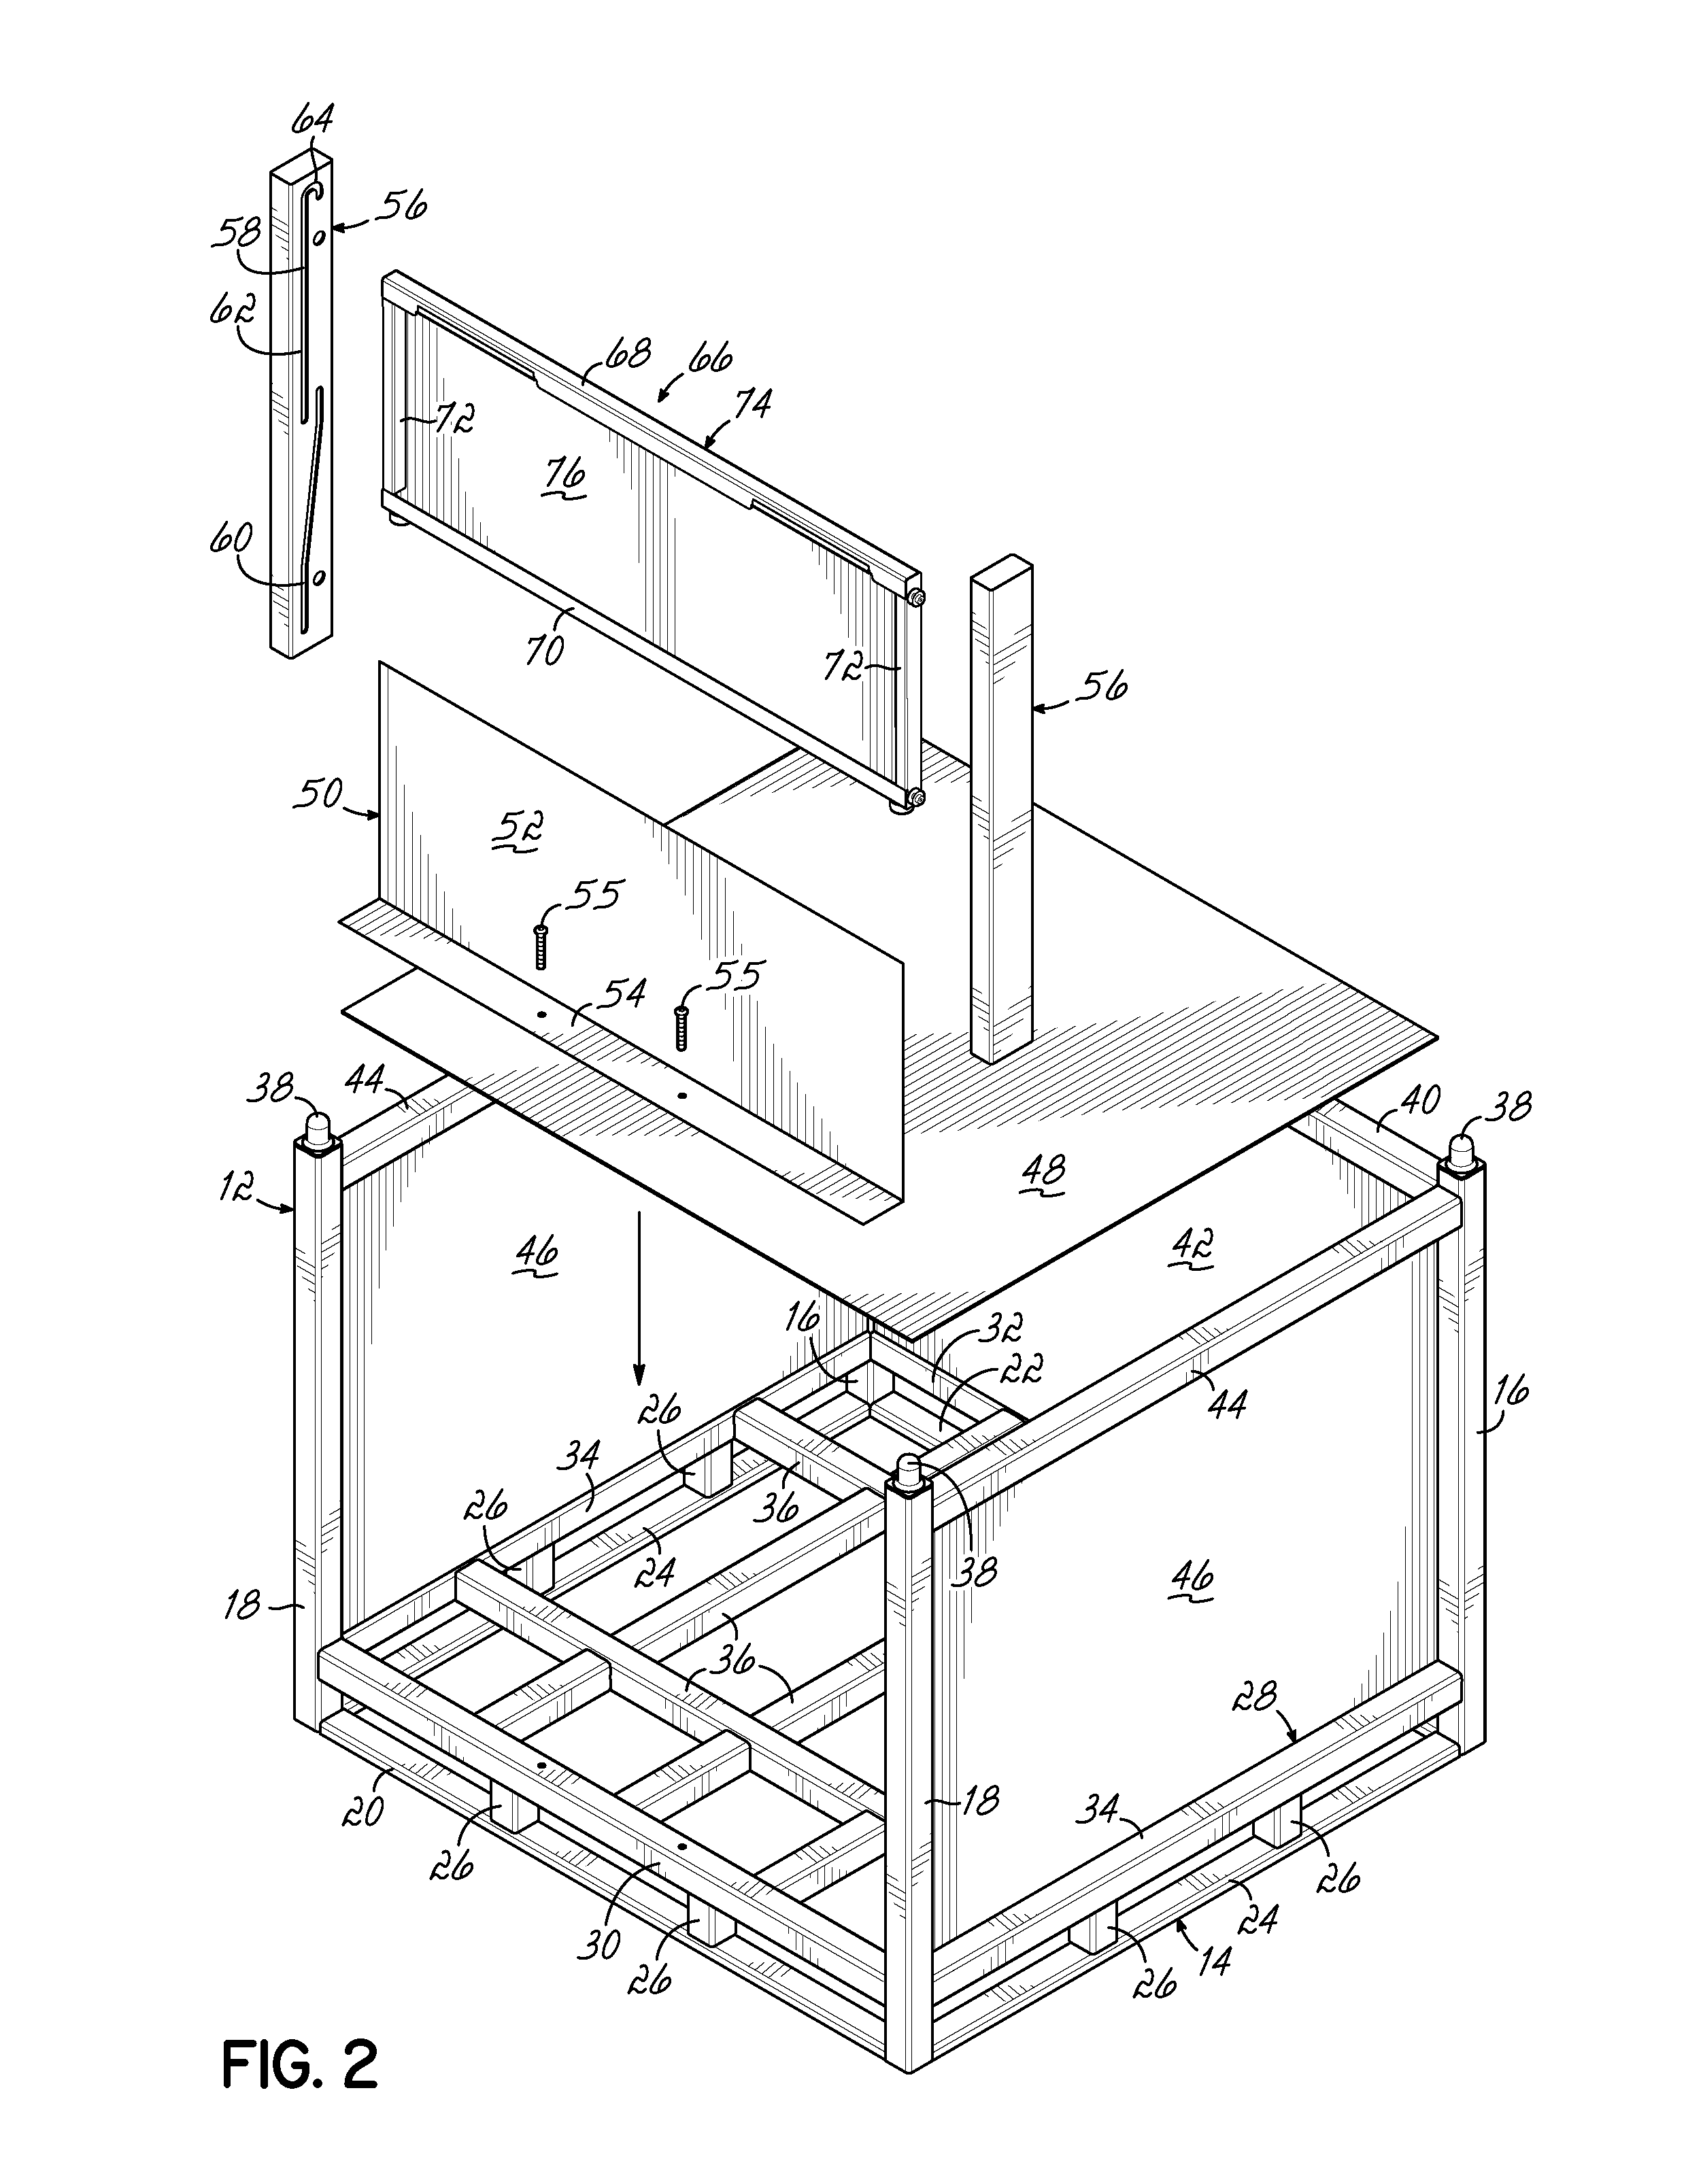 Container having door assembly and multiple layers of tracks